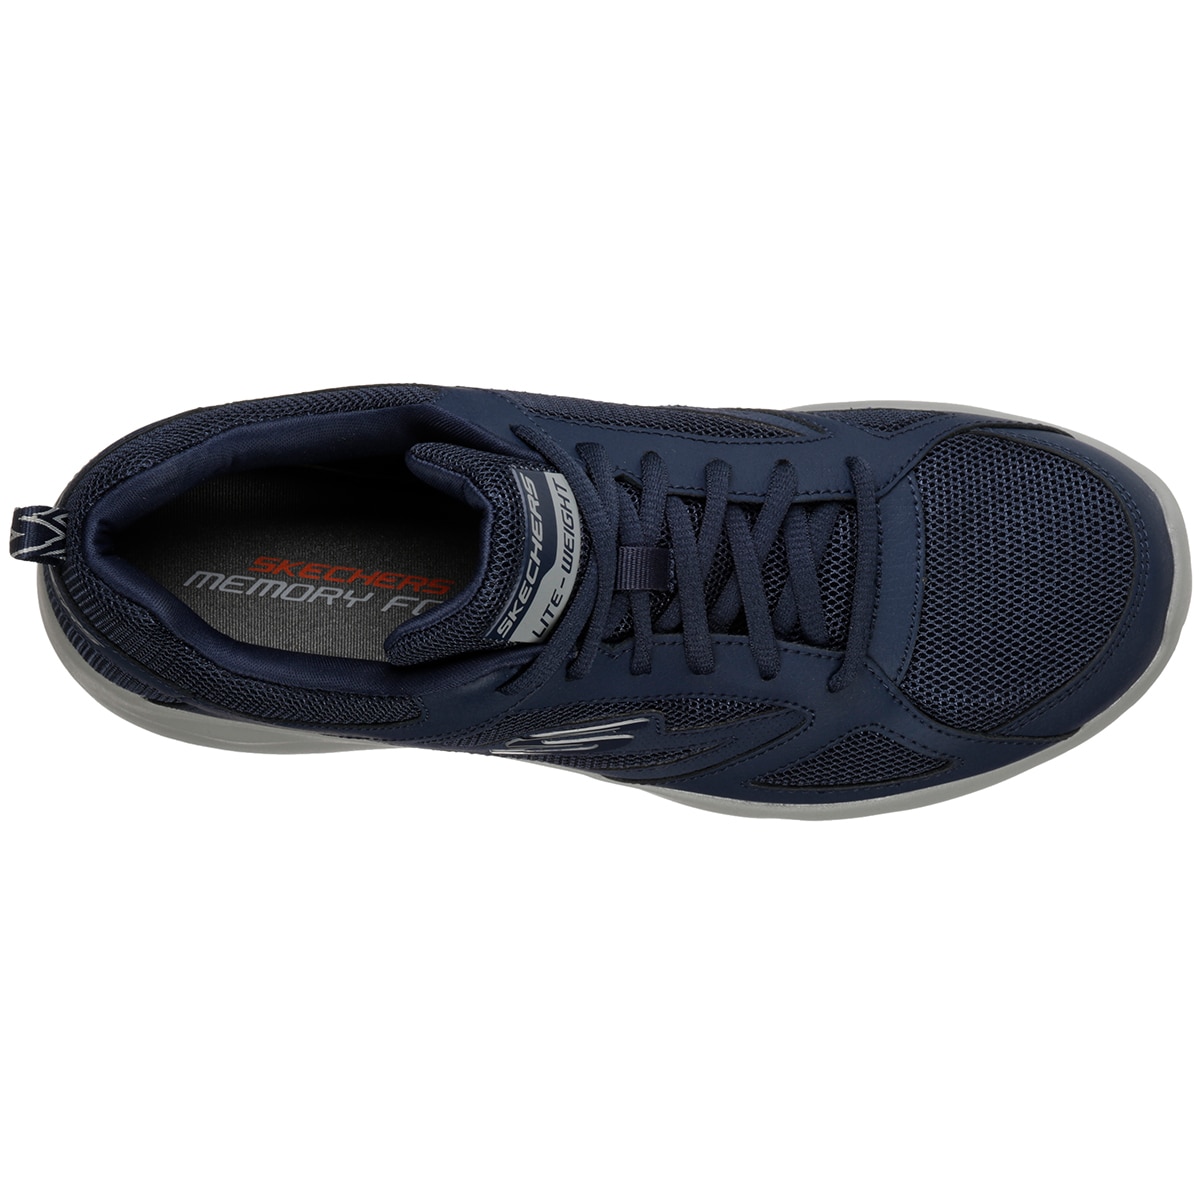 Skechers Shoes Dynamight 2.0 Lace Up - Navy